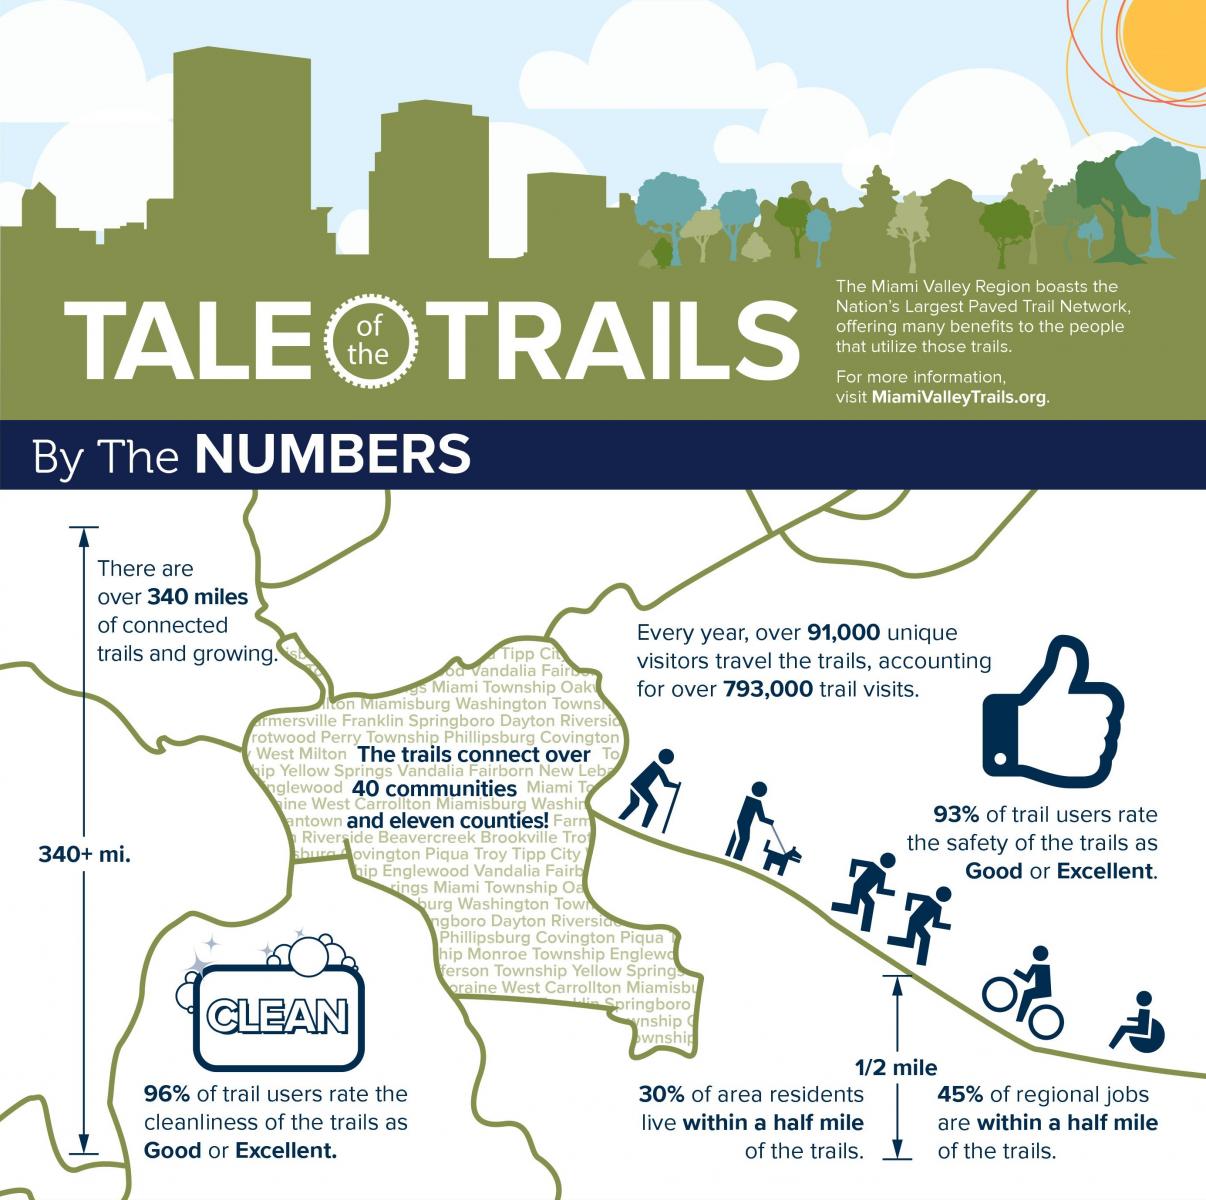 mvrpc tale of the trails 2018 infographic